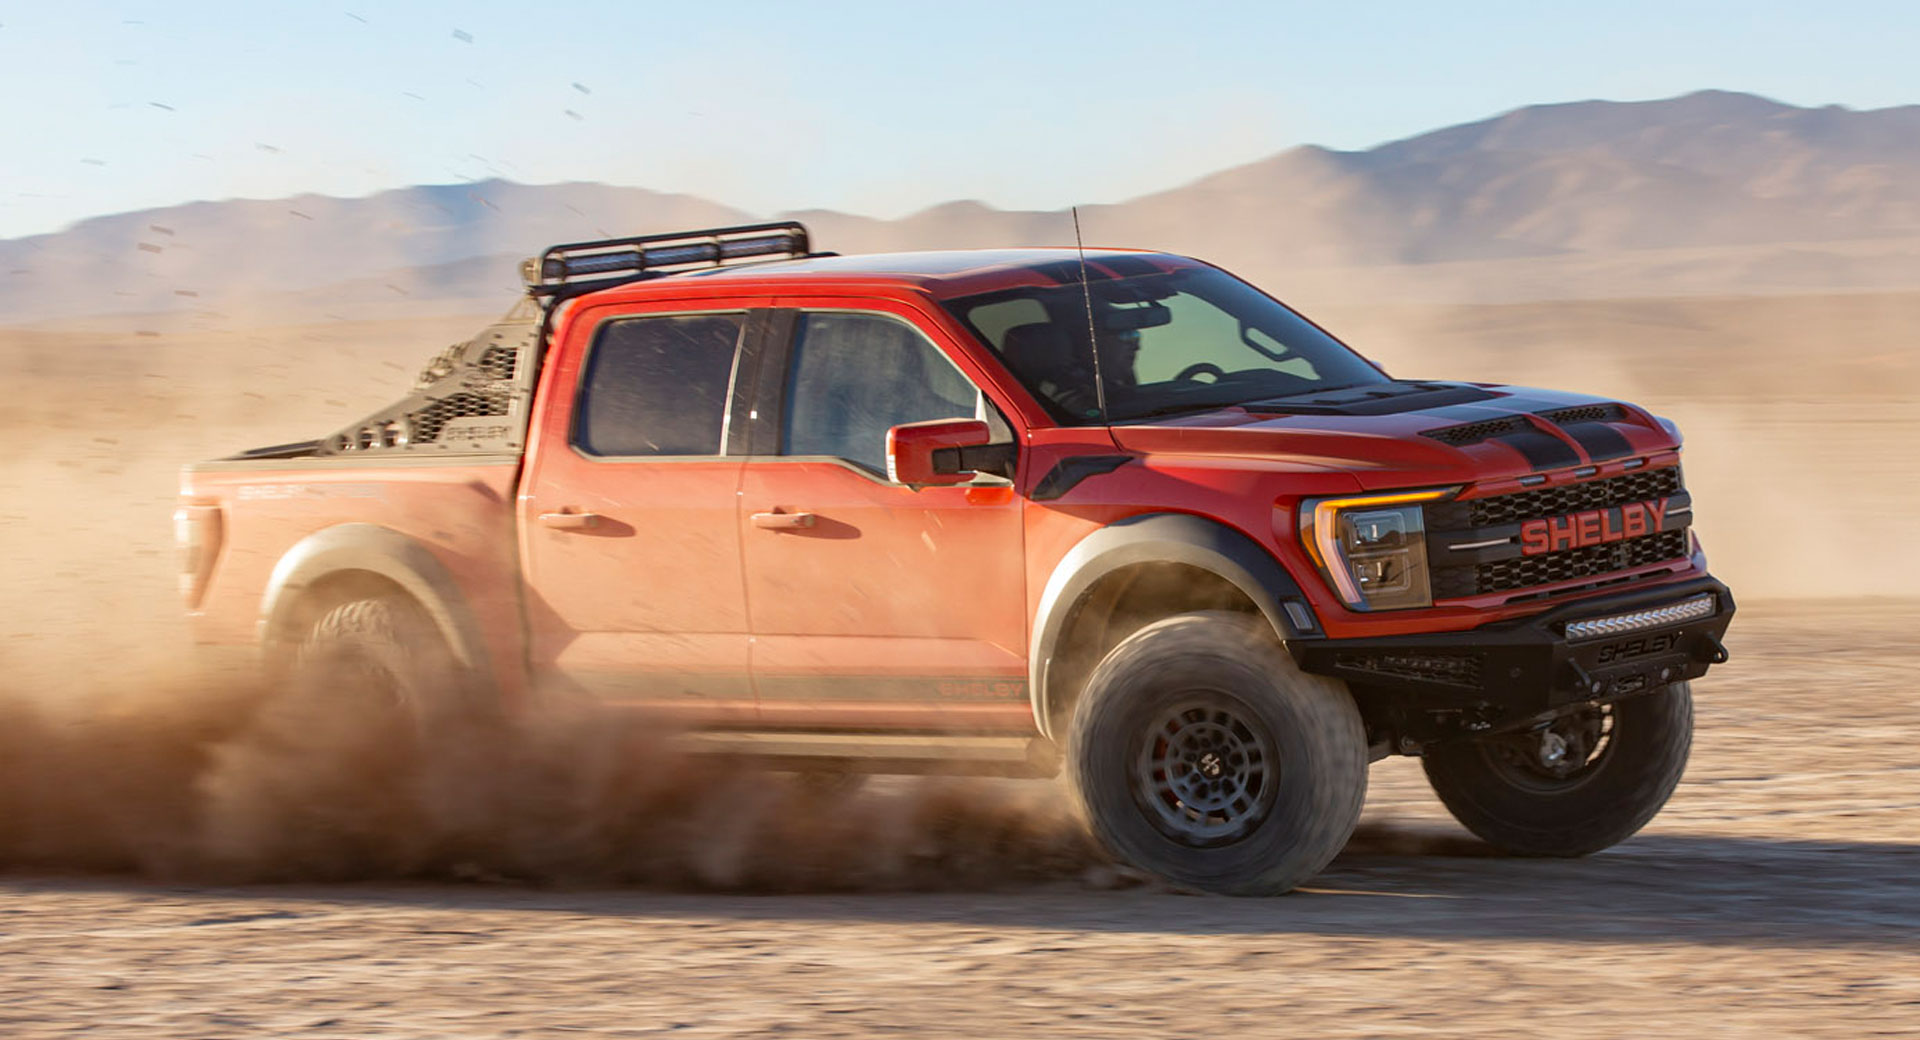 Shelby's Latest Ford F-150 Raptor Combines Baja Looks With 525+ HP